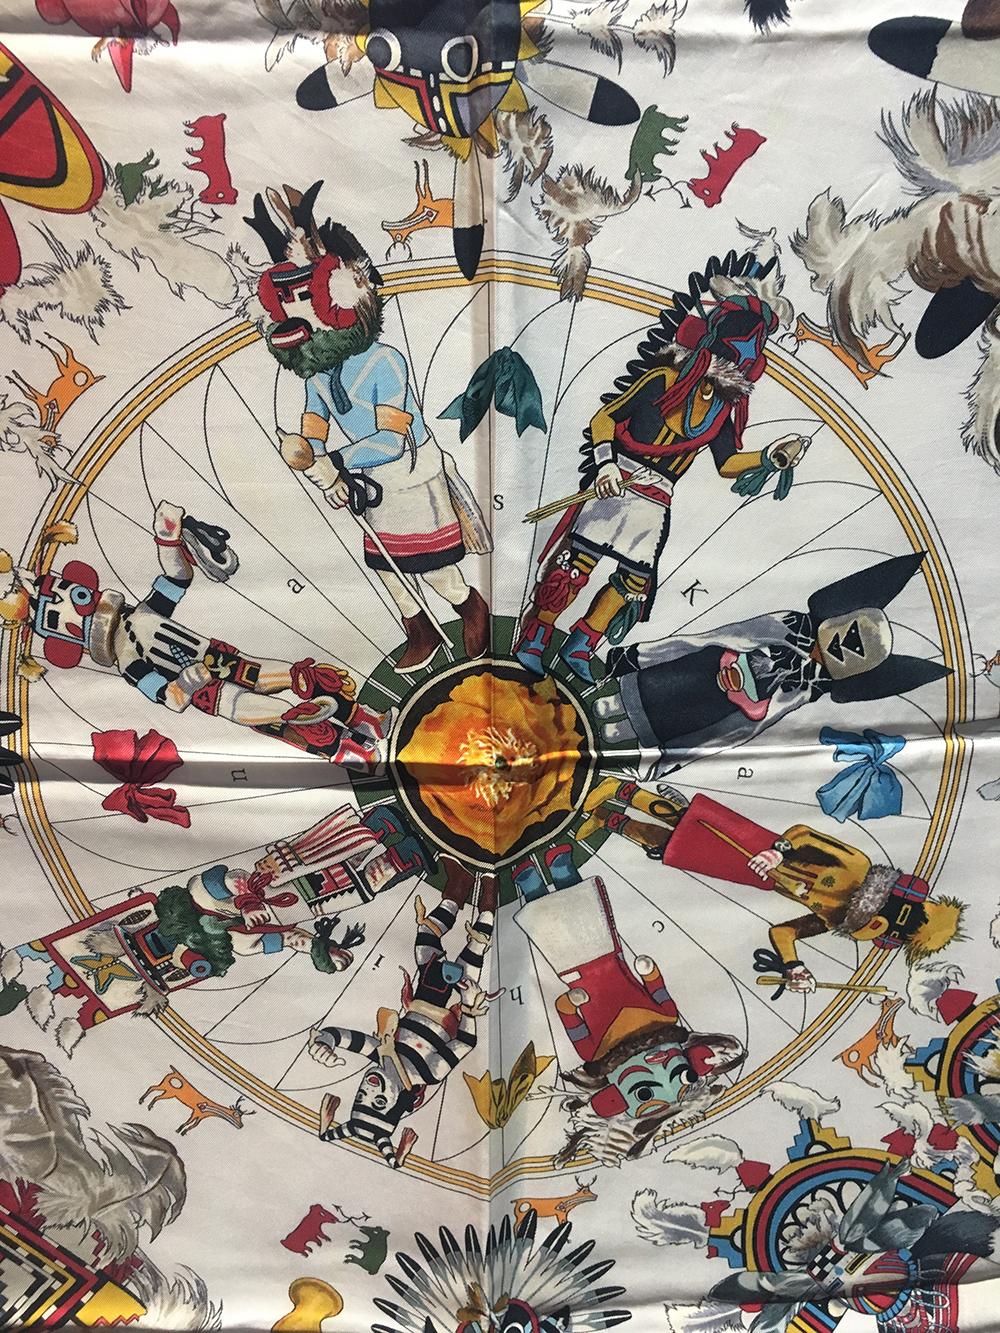 RARE Hermes Vintage White Kermit Oliver Kachinas Silk Scarf c1990s in excellent condition. Original silk screen design c1992 by Kermit Oliver features various mutlicolor native american chiefs and people in traditional dress over a white background